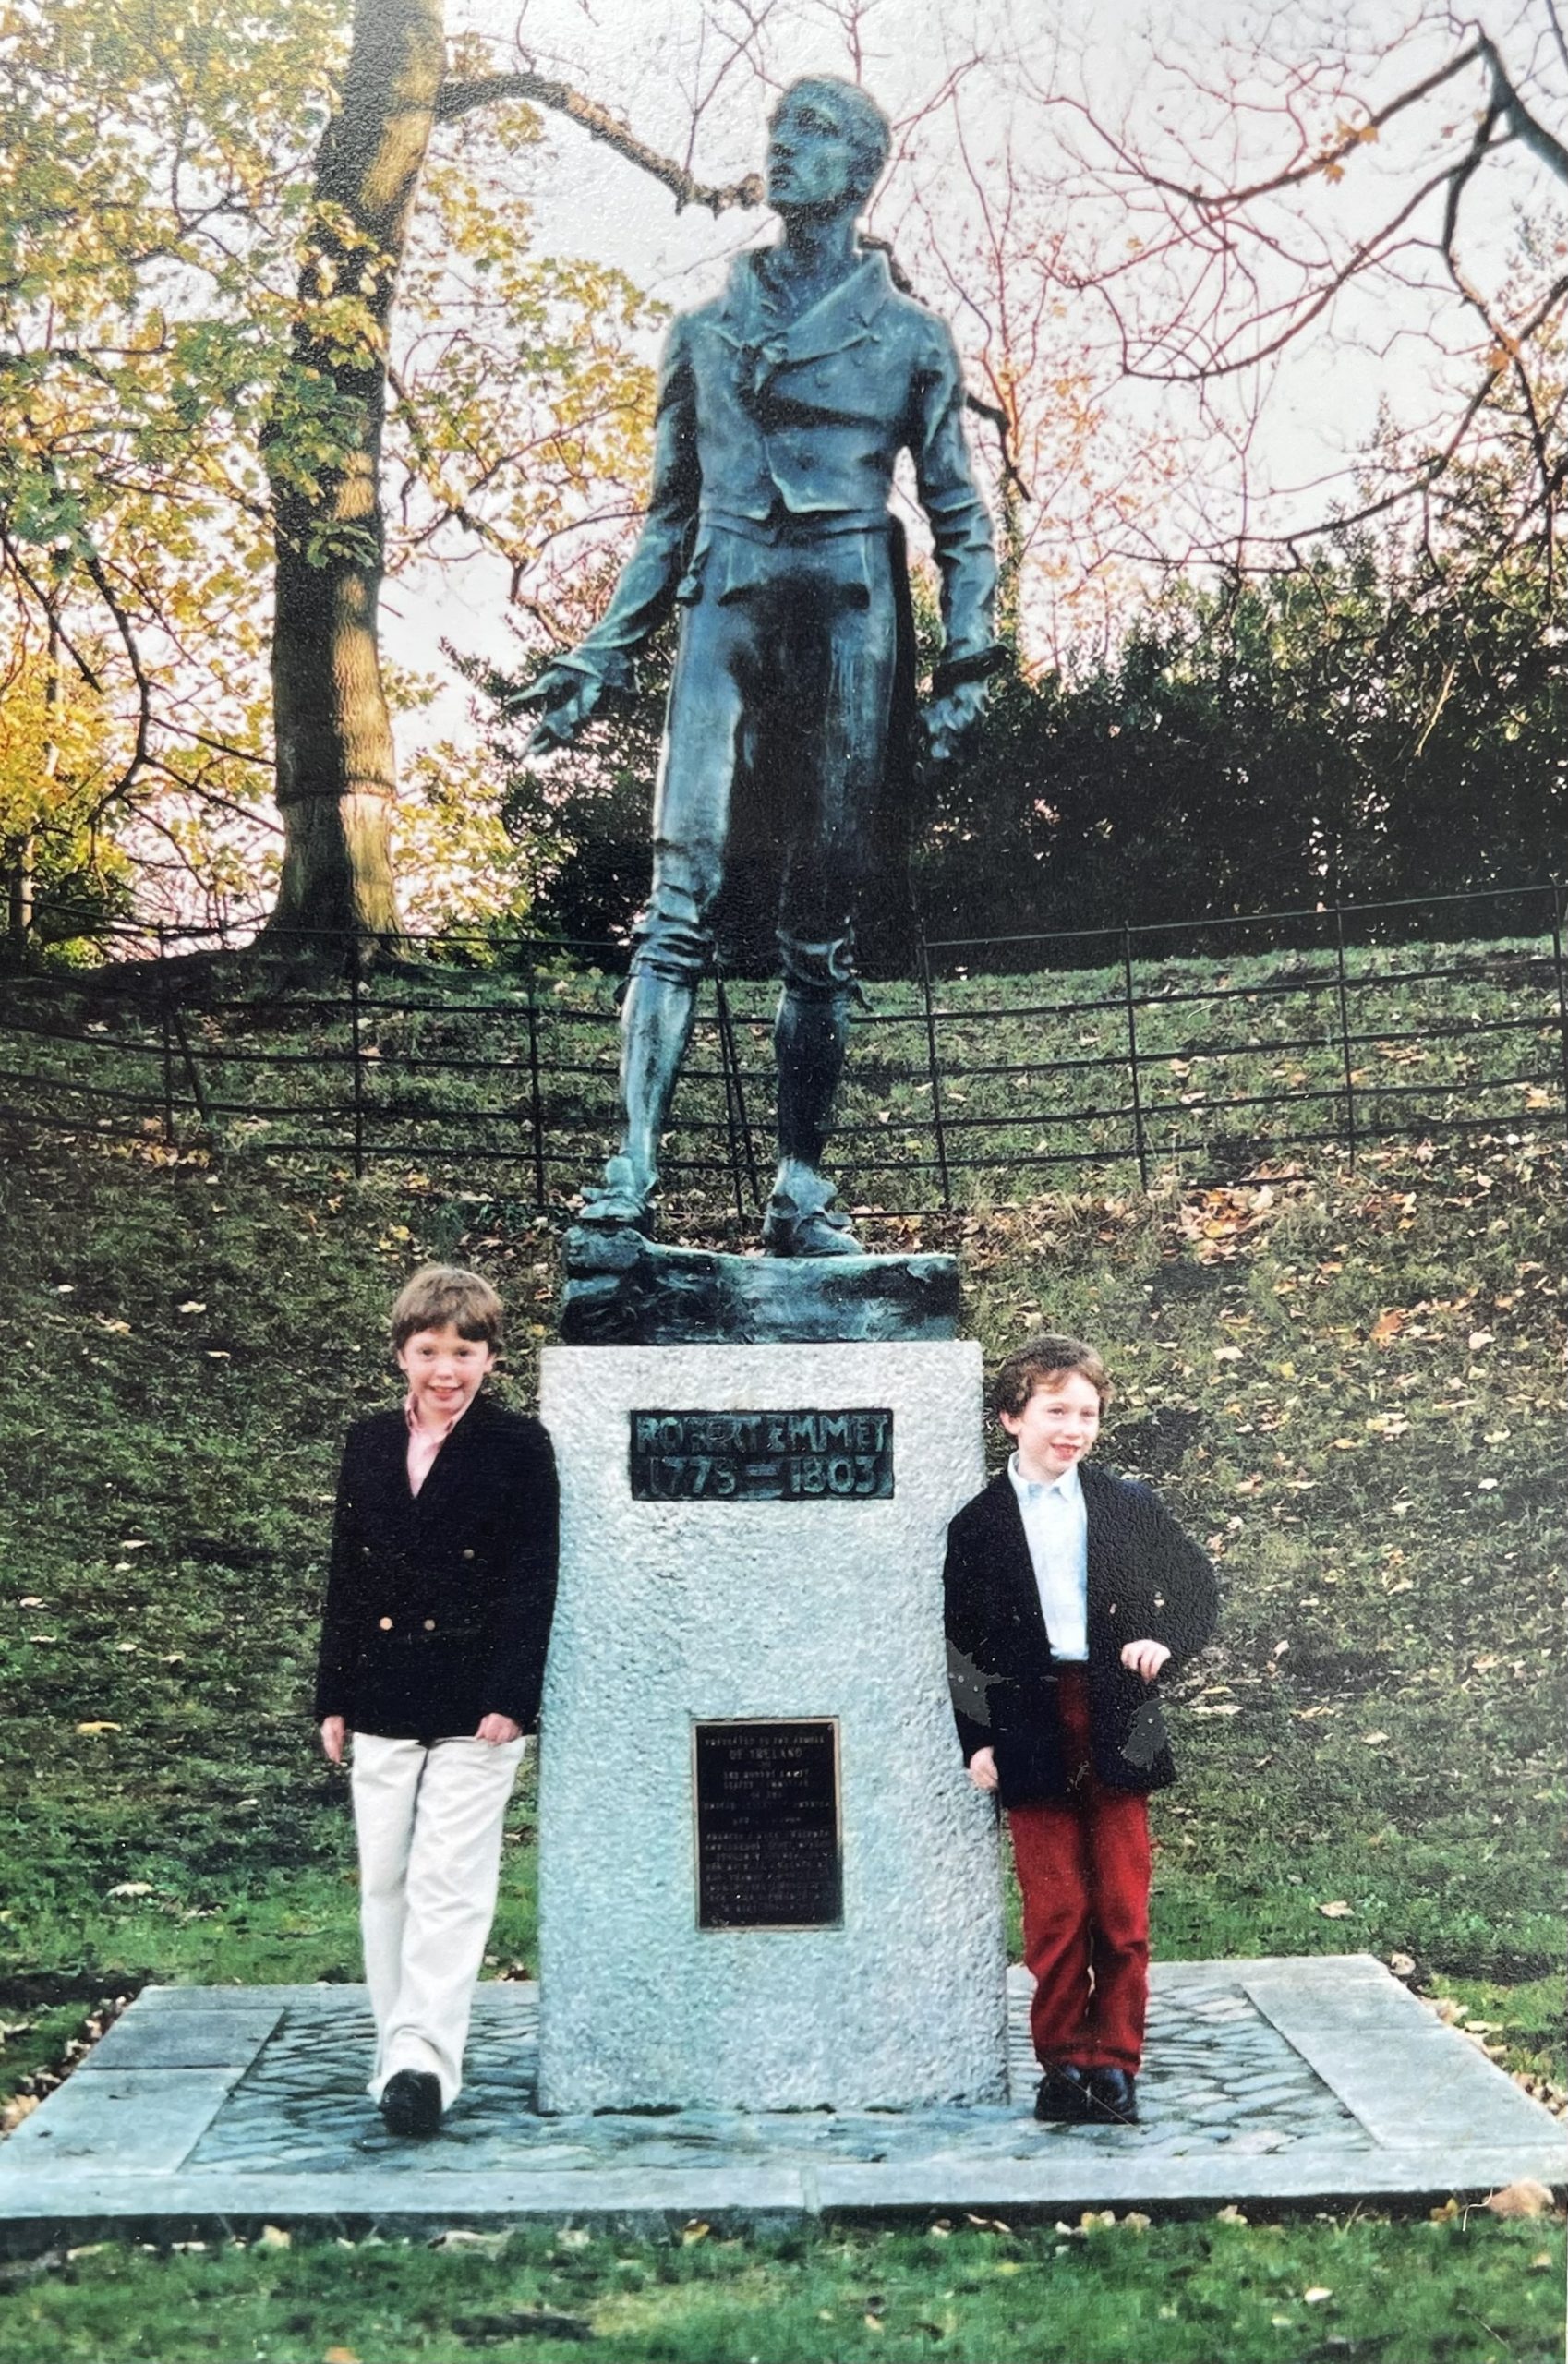 Thomas and Ferdy Emmet standing at the Robert Emmet Statue, 2003. Courtesy of the Emmet Family.